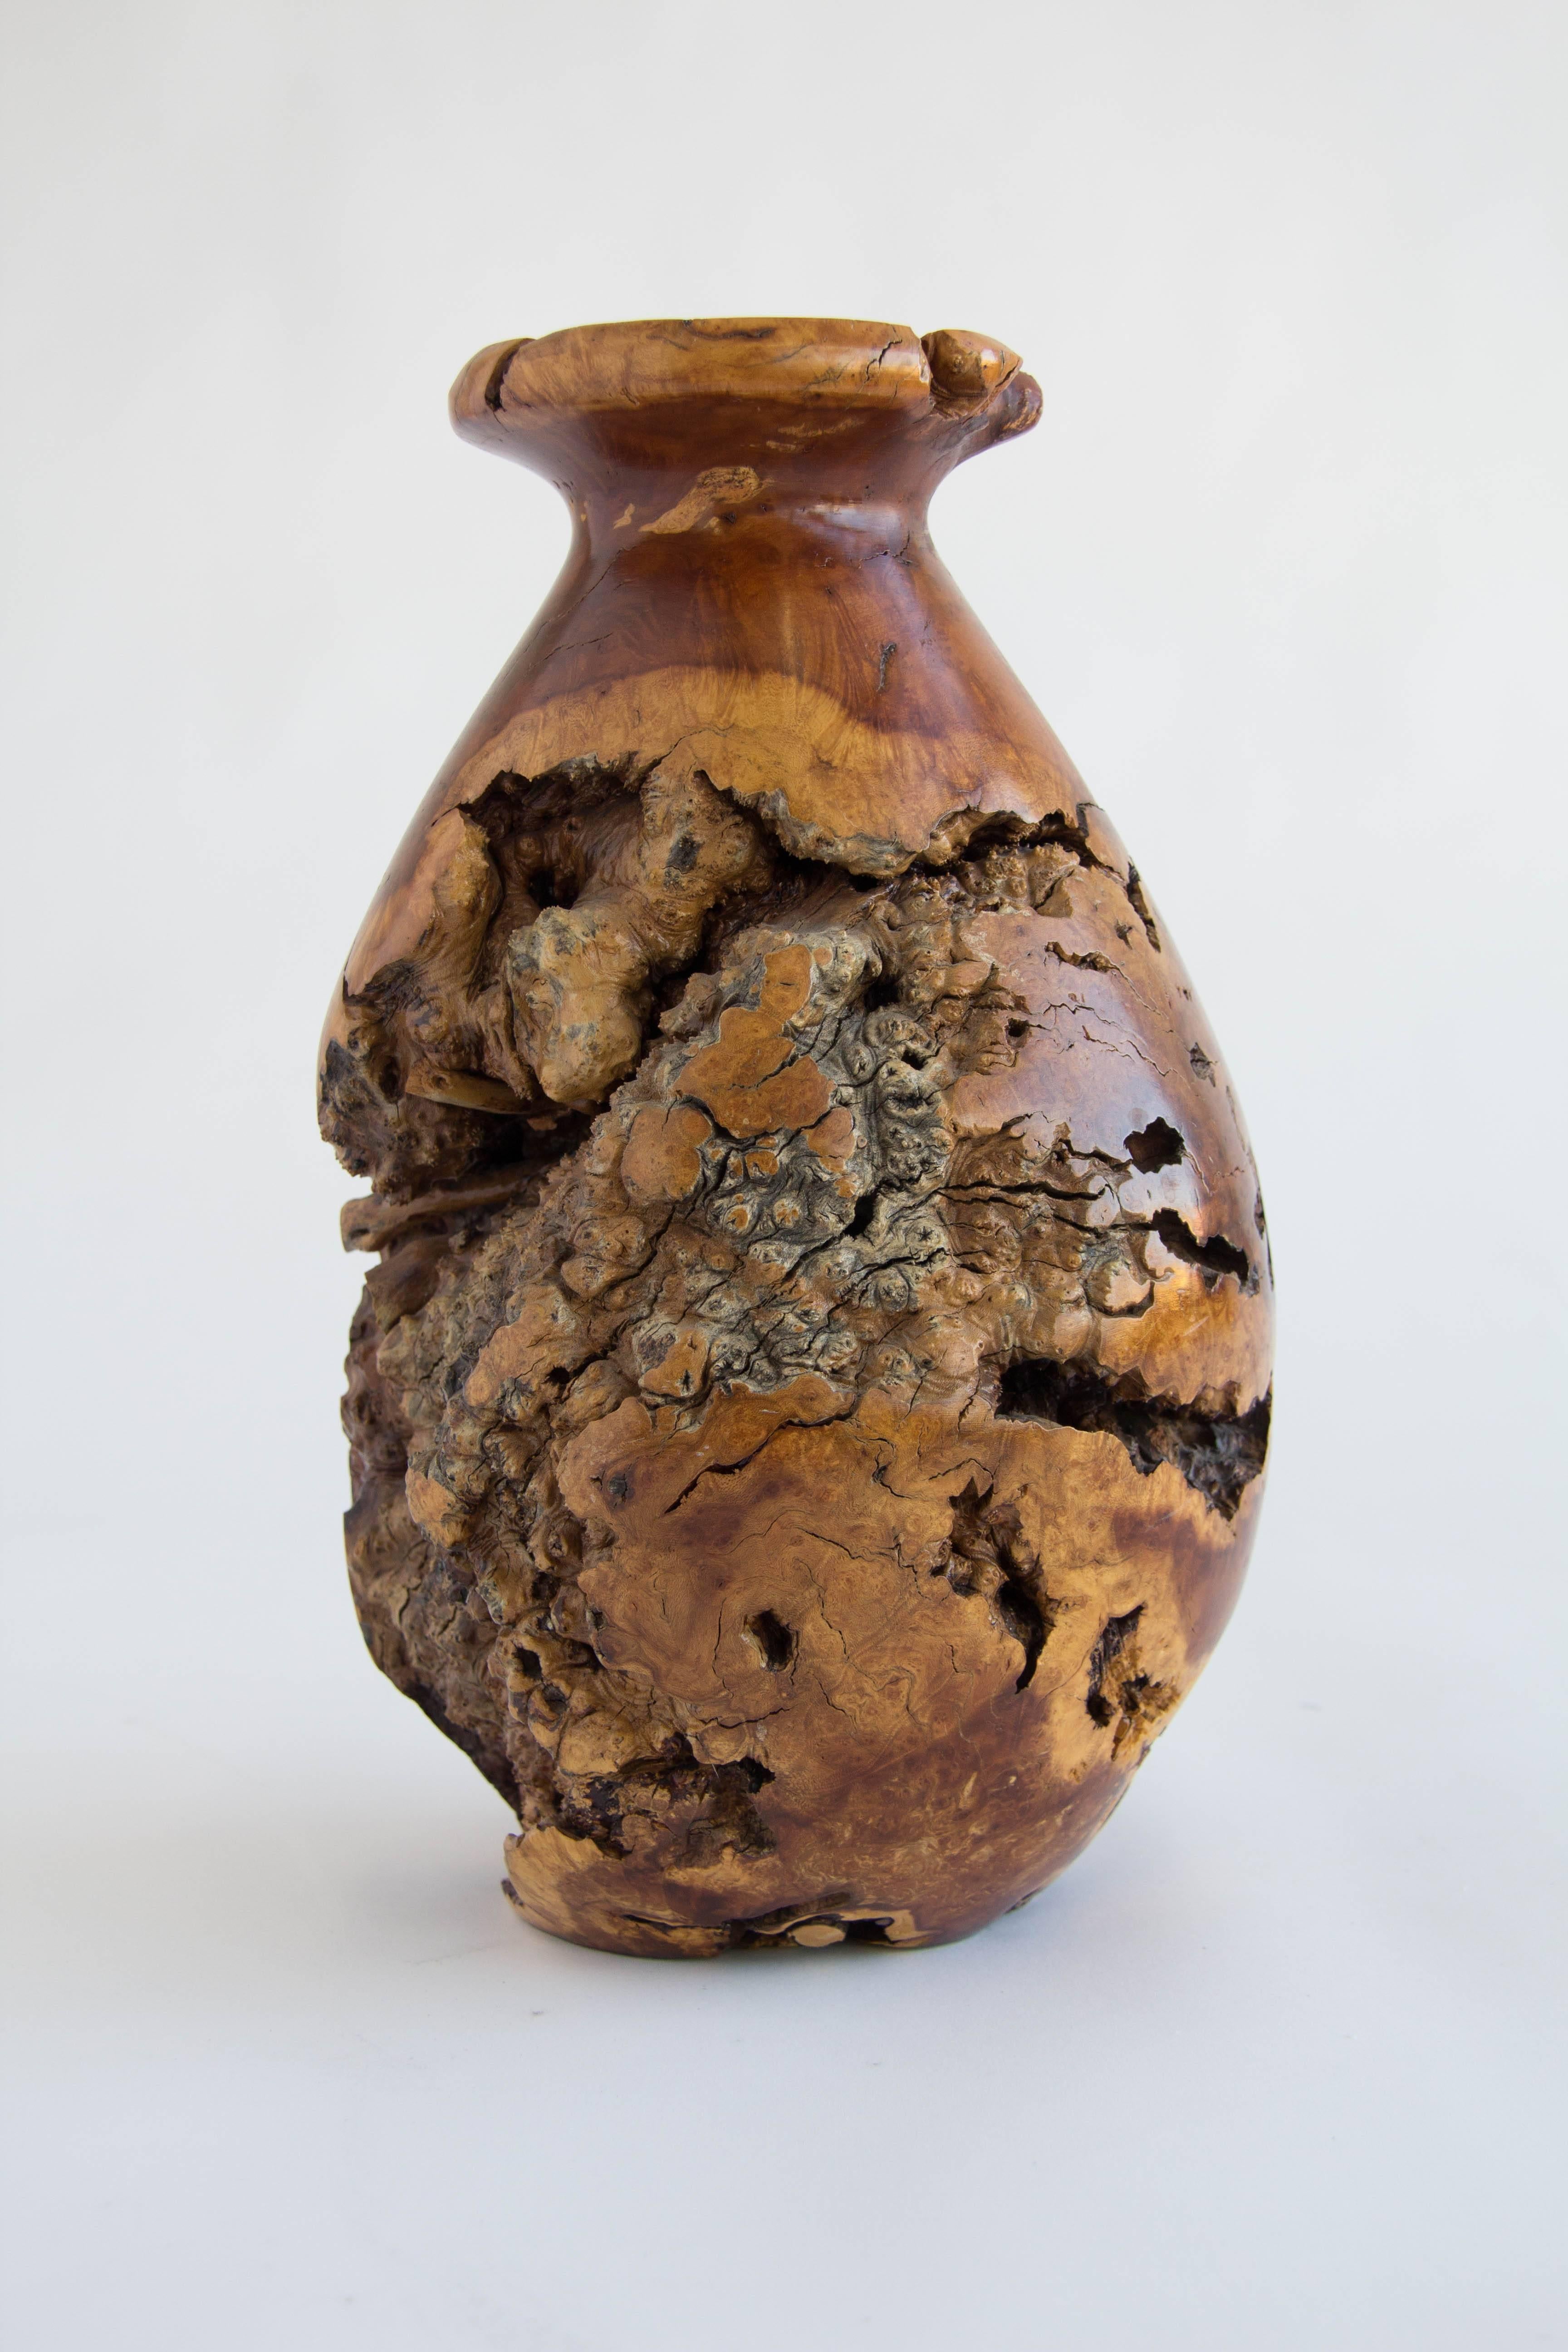 Large burl vase signed by unknown artist.